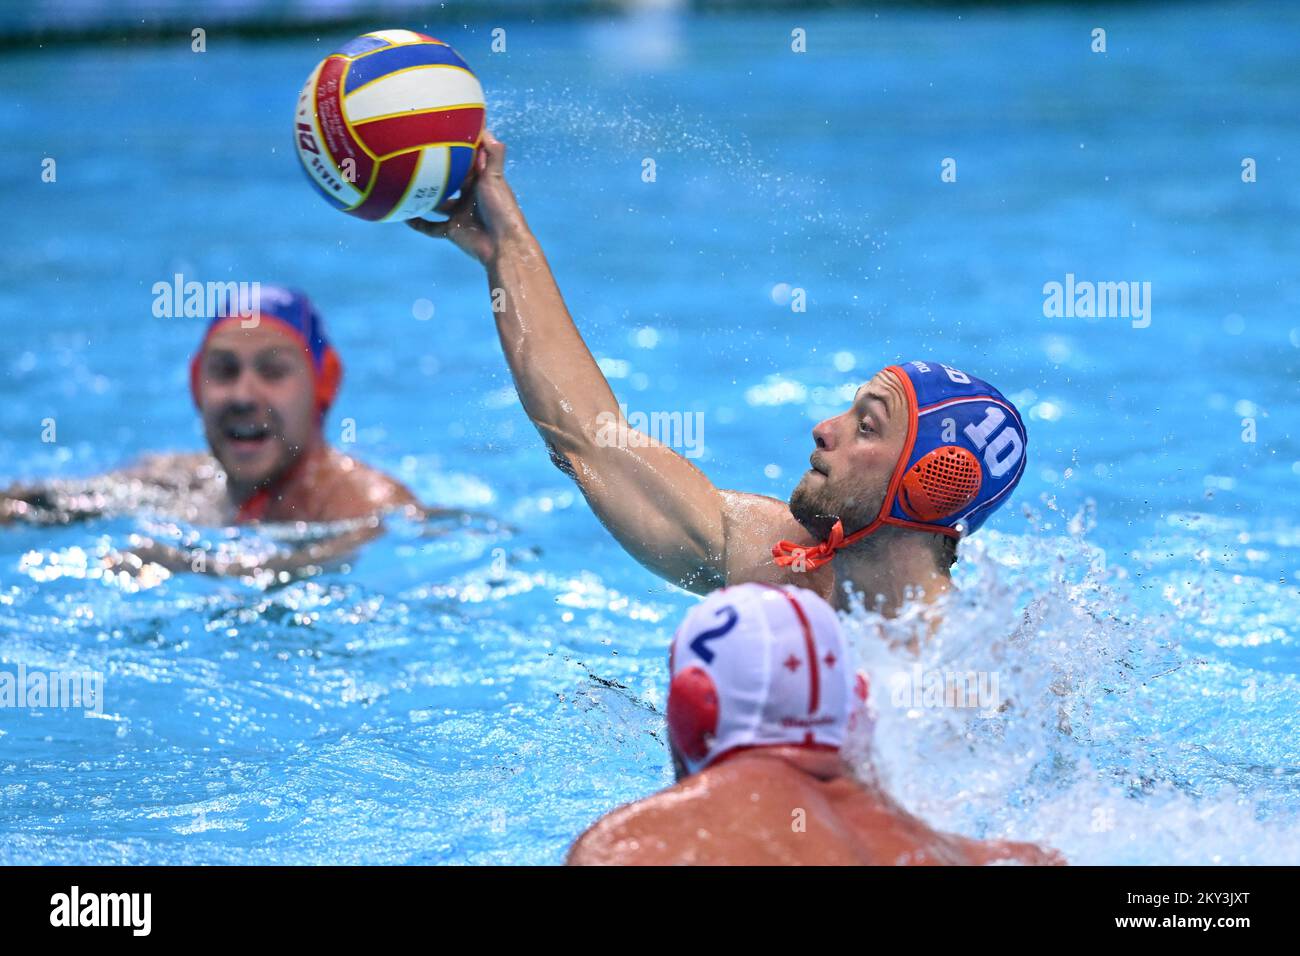 SPLIT, CROATIA - SEPTEMBER 4: Pascal Janssen of Netherlands in action during the 2022 European Water Polo Championship match Georgia and Netherlands at the Spaladium Arena on September 4, 2022 in Split, Croatia. Photo: Marko Lukunic/PIXSELL Stock Photo